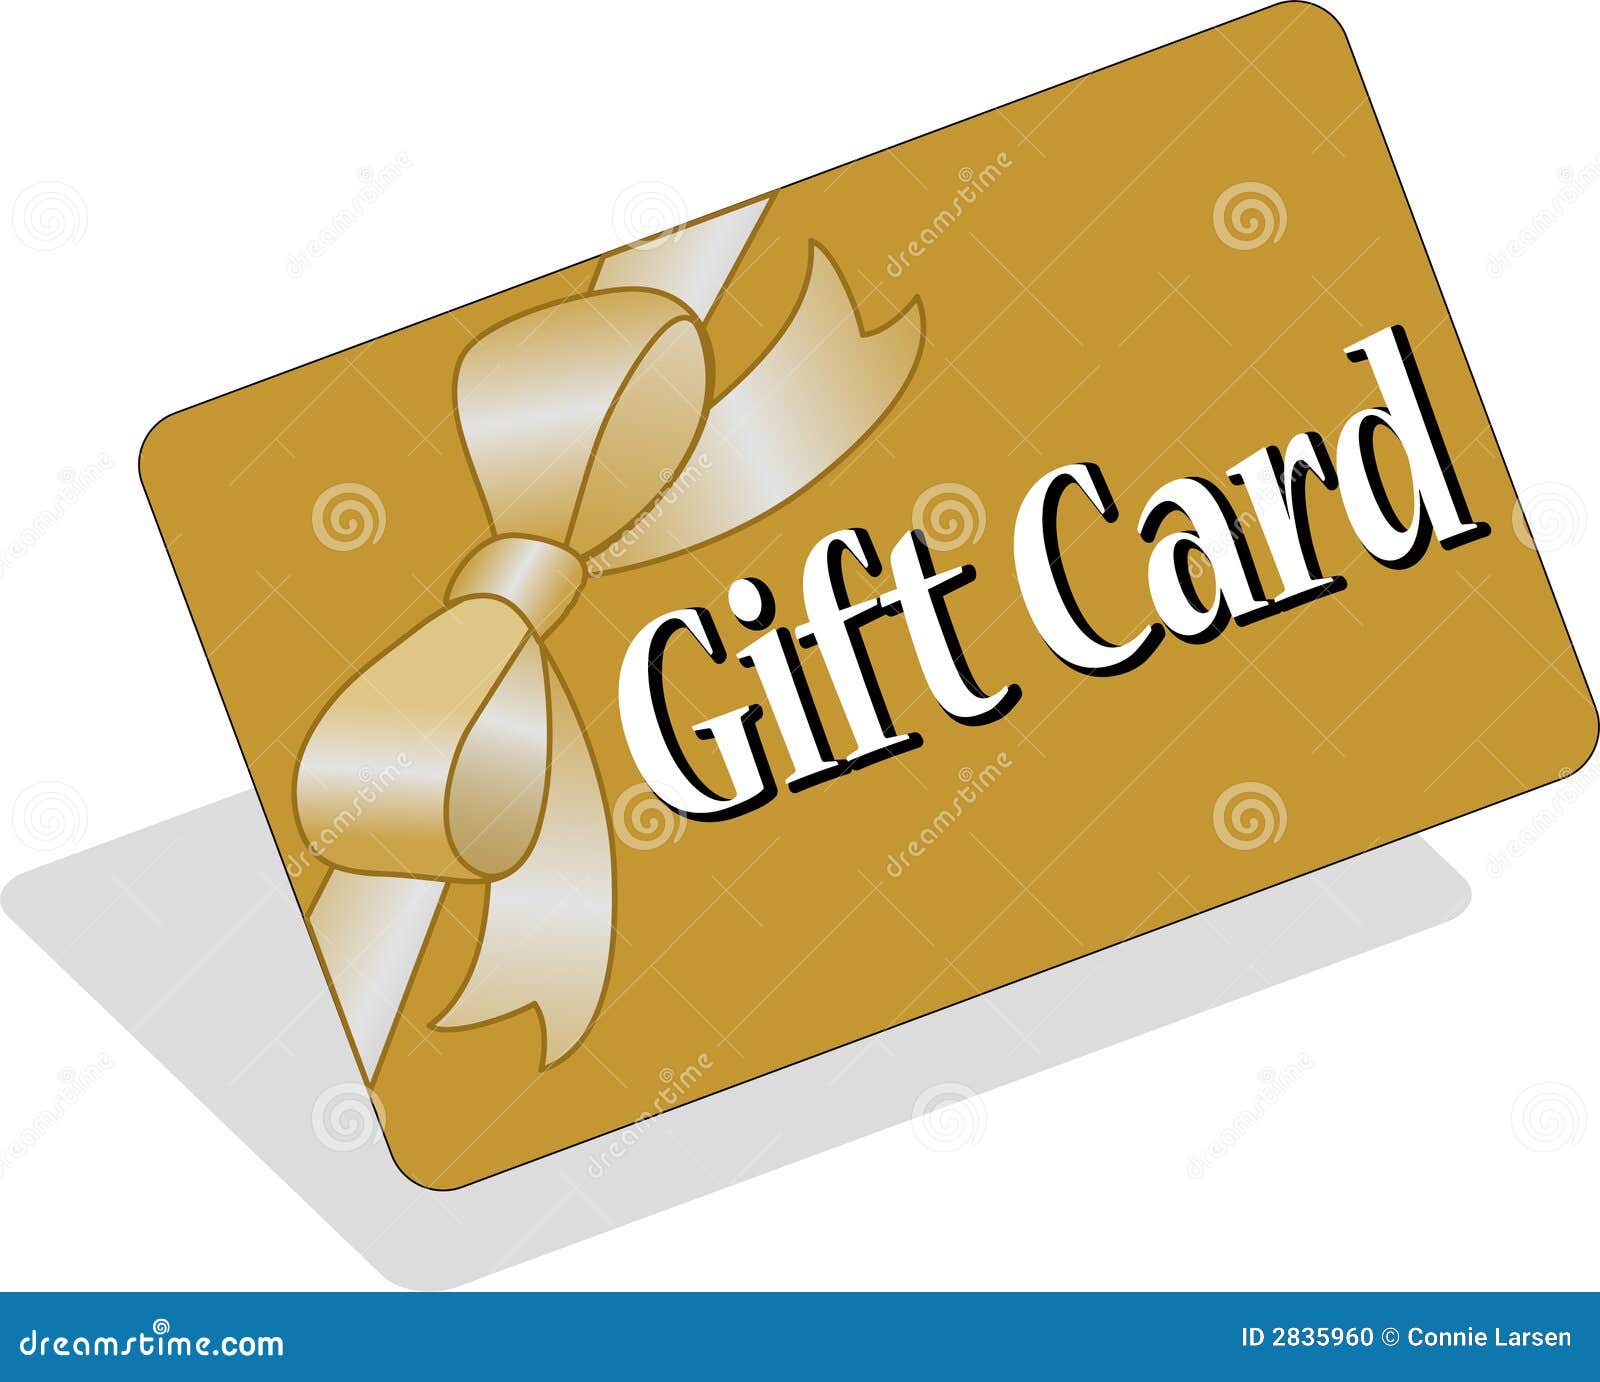 clipart gift certificates - photo #41